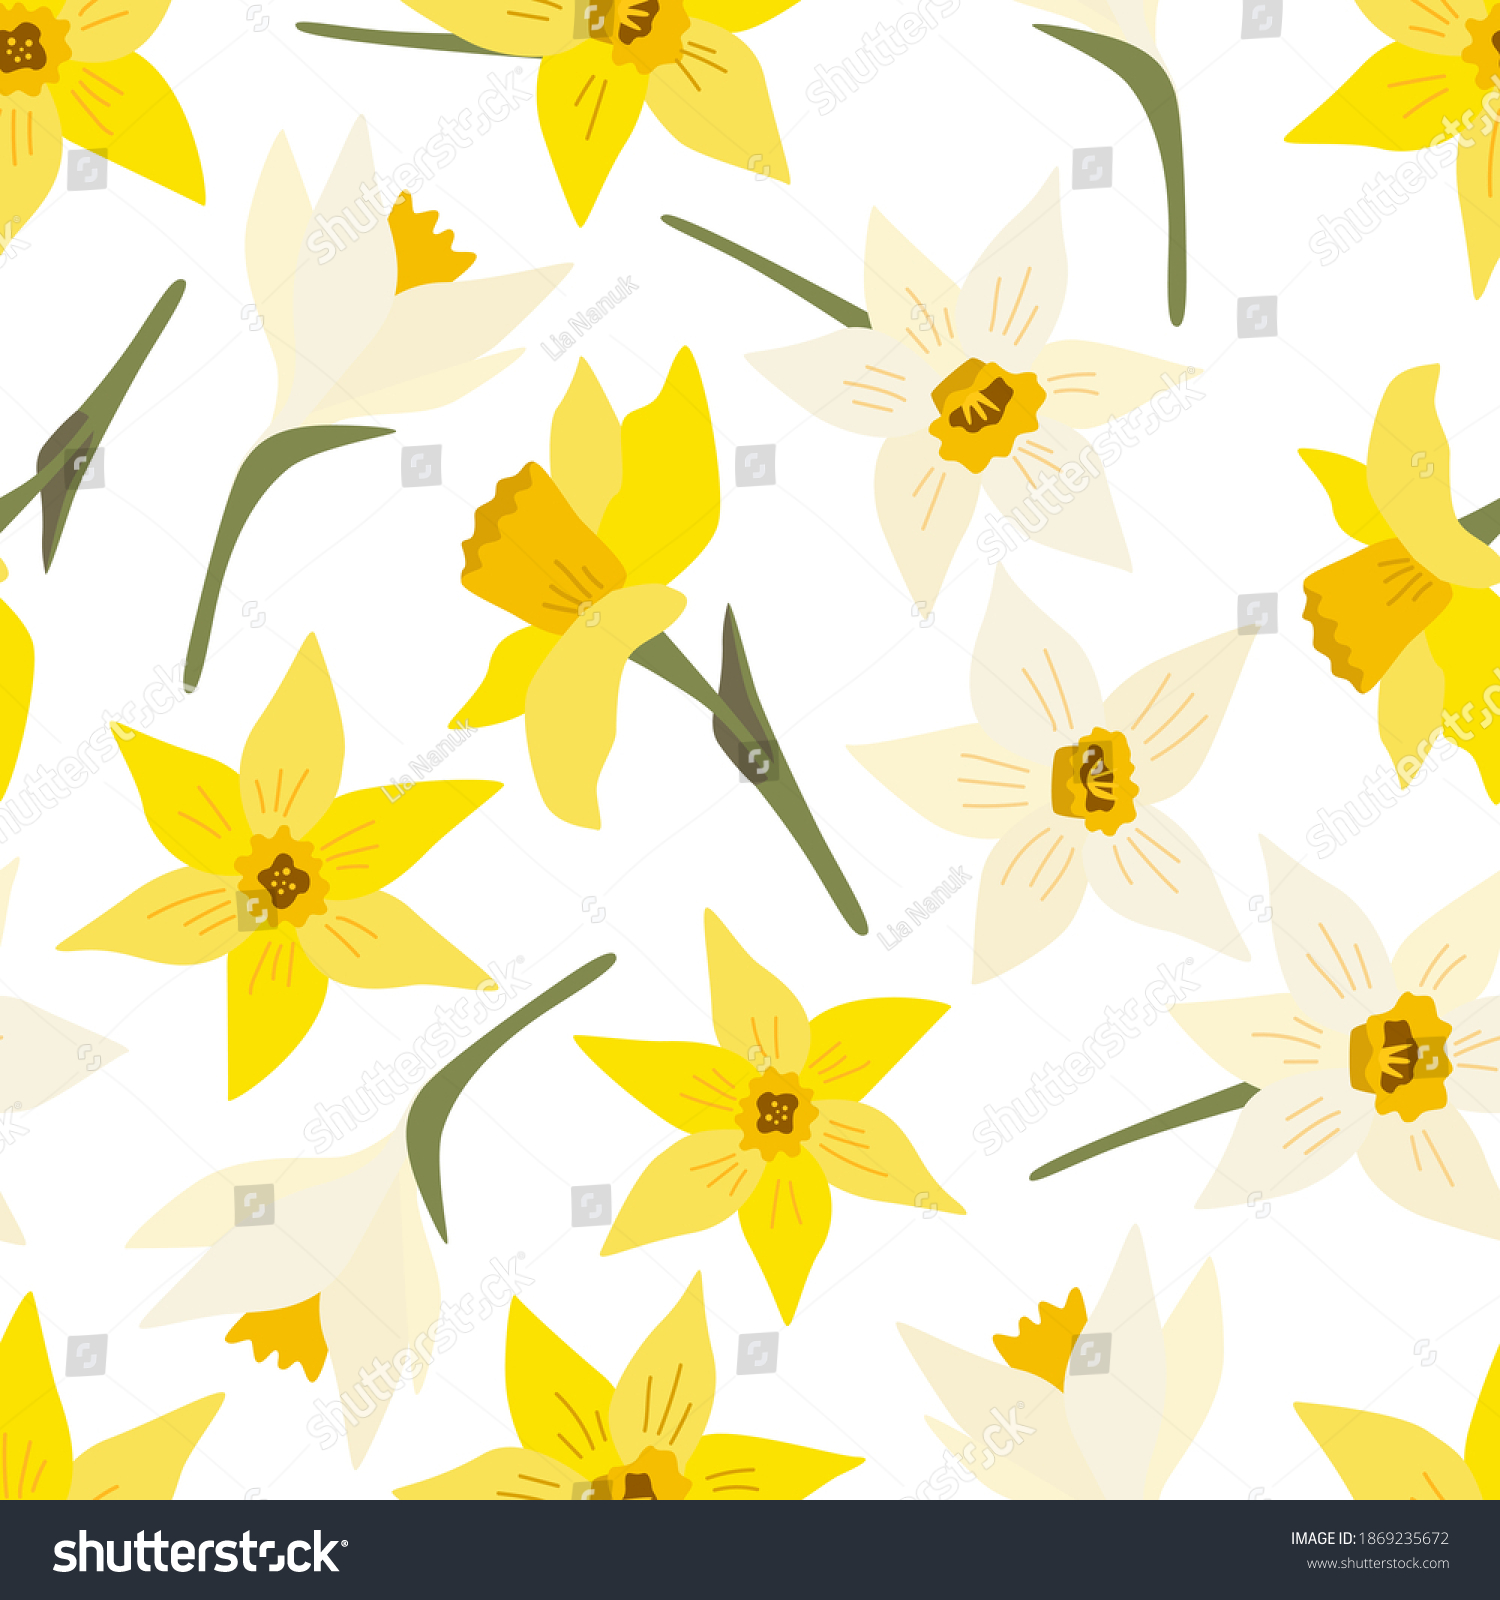 SVG of Floral seamless pattern with spring flowers. White and yellow narcissus. Isolated vector illustration. Background for wrapping paper, textile, wallpaper, scrapbooking. Flat cartoon design. svg